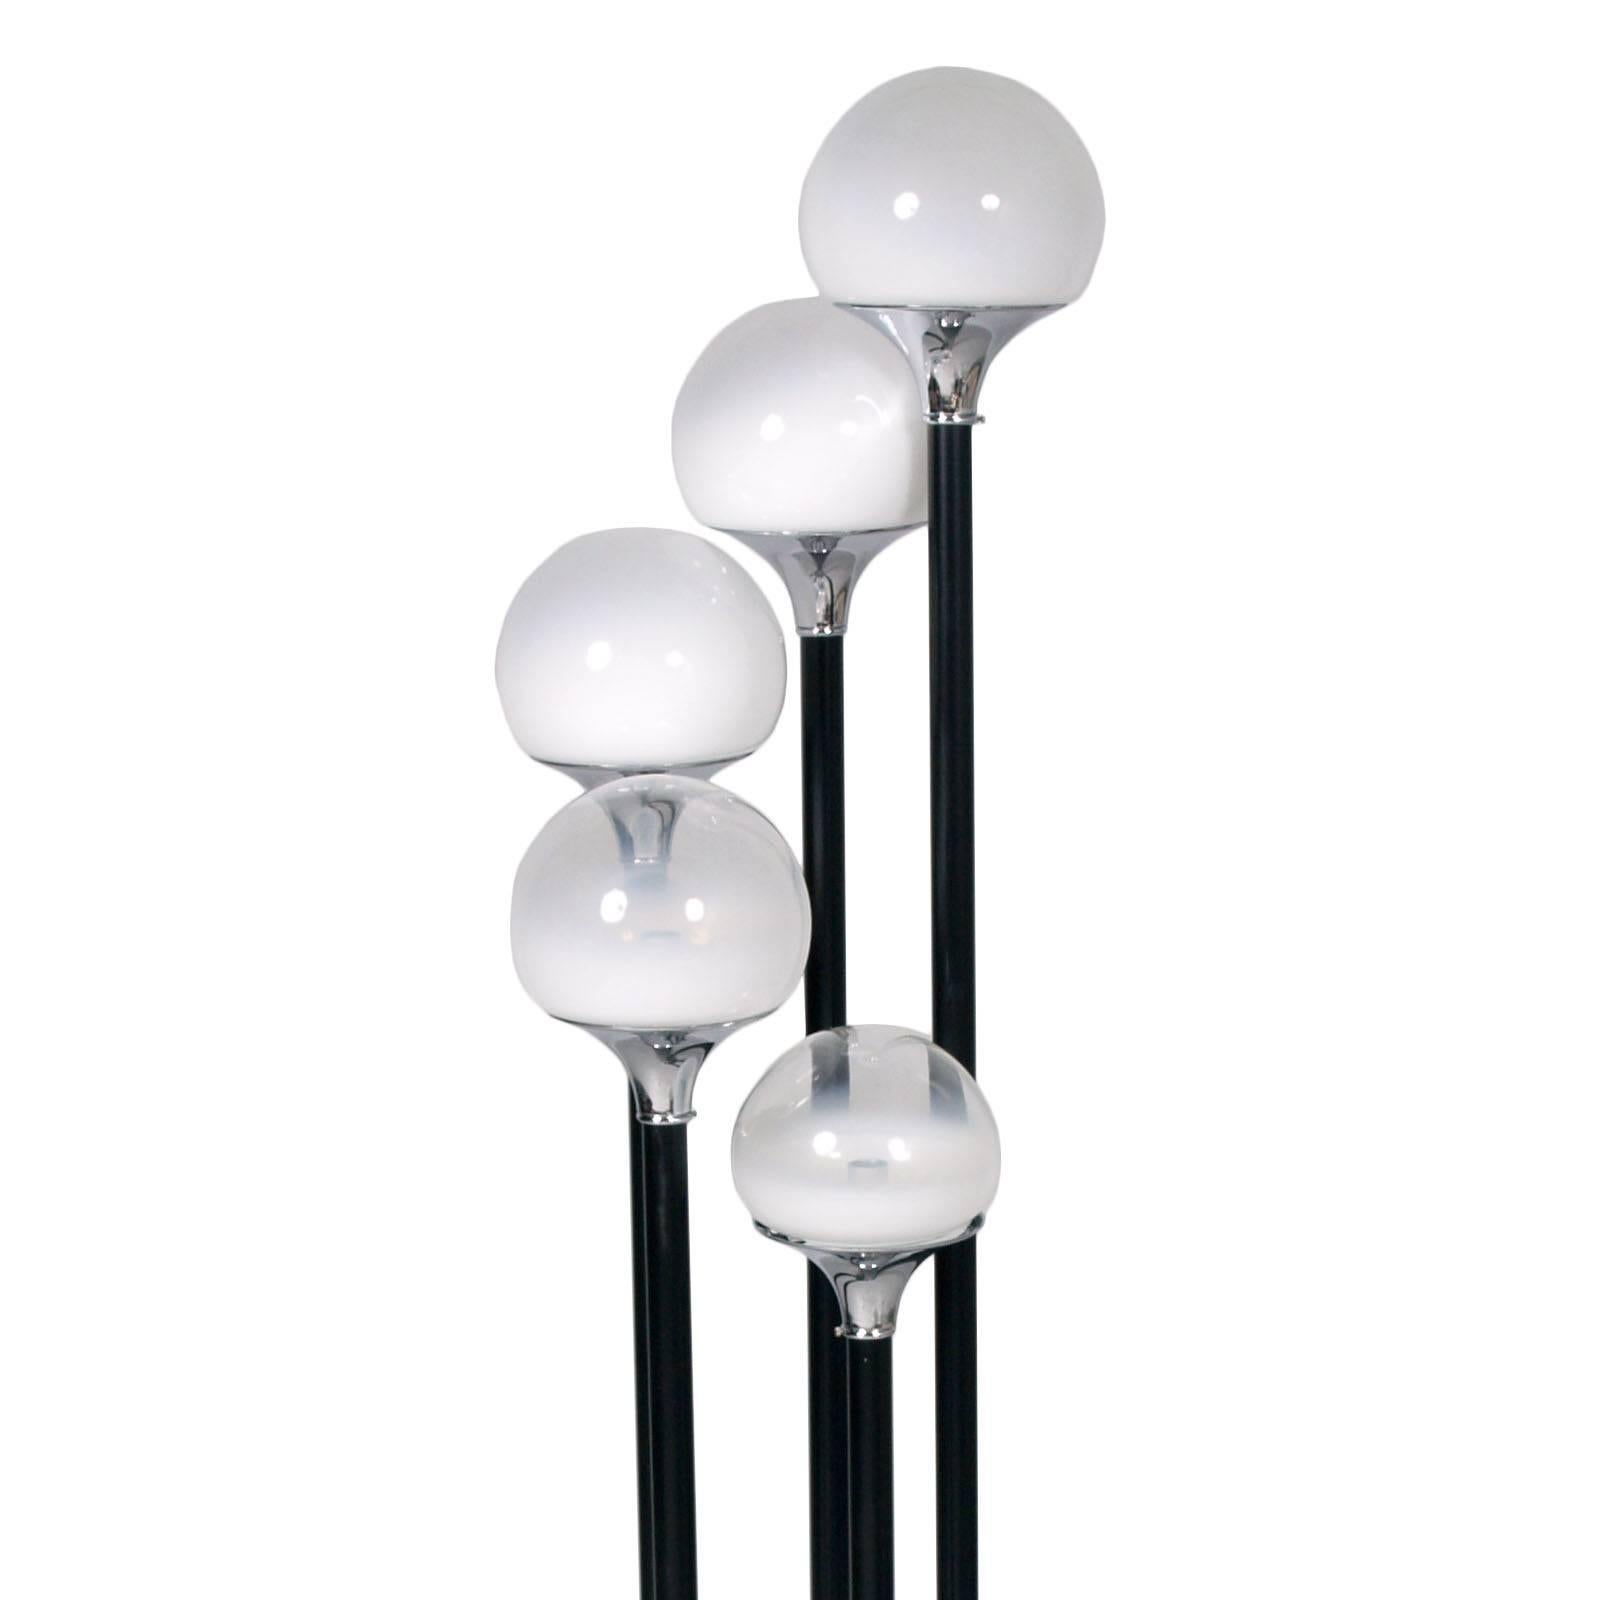 1960s Italy Floor lamp with five lights in chromed and black laquered steel ; bowl by Mazzega lattimo Murano-glass , gradually transparent at the top.
Ready-to-use renewed electrical system

Measures cm: Diameter base 28 Diameter max 45 Height